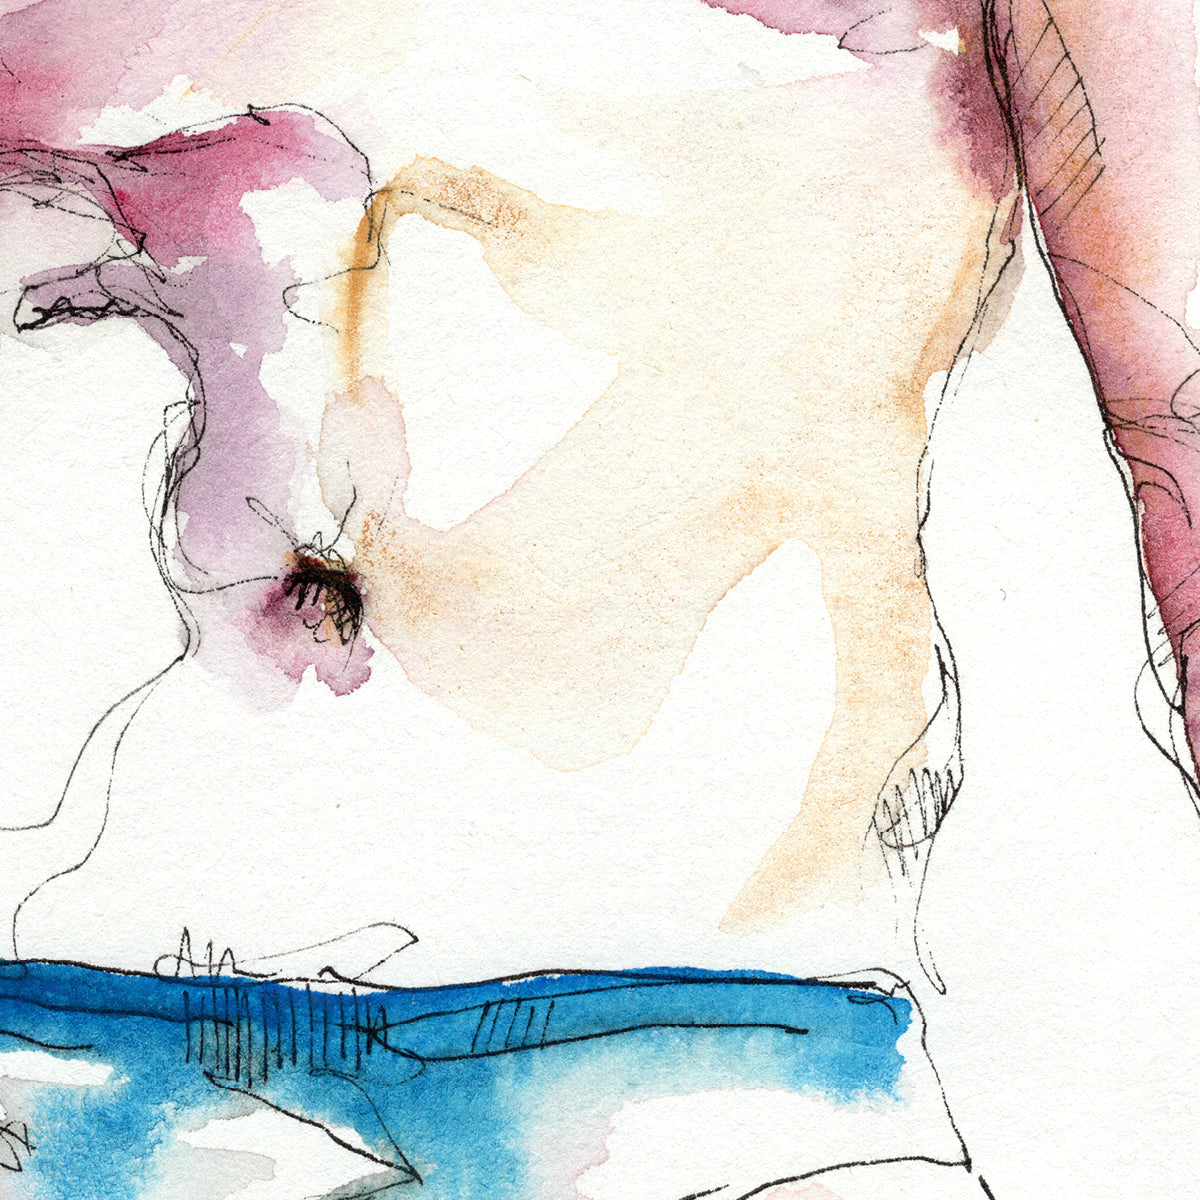 Slim Male Figure Looking to the Right in His Speedo - Original Watercolor Painting